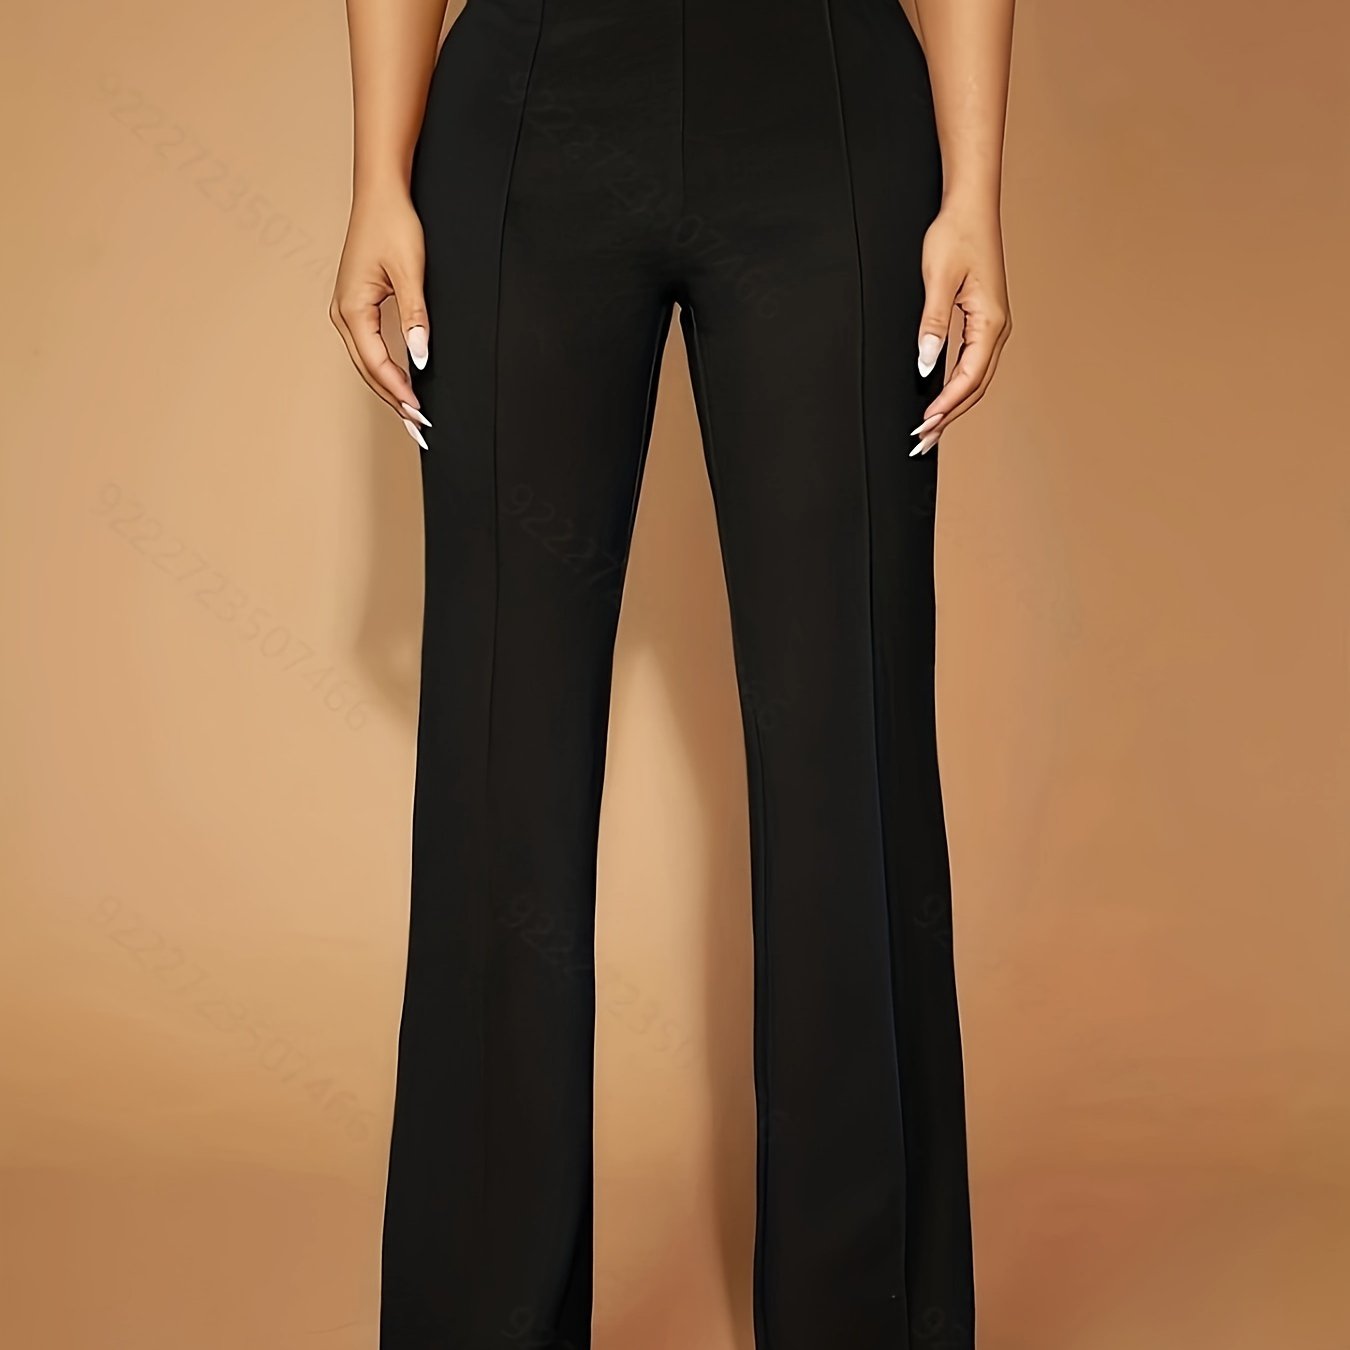 Solid High Waist Slim Pants, Casual Flare Leg Pants For Spring & Fall, Women's Clothing